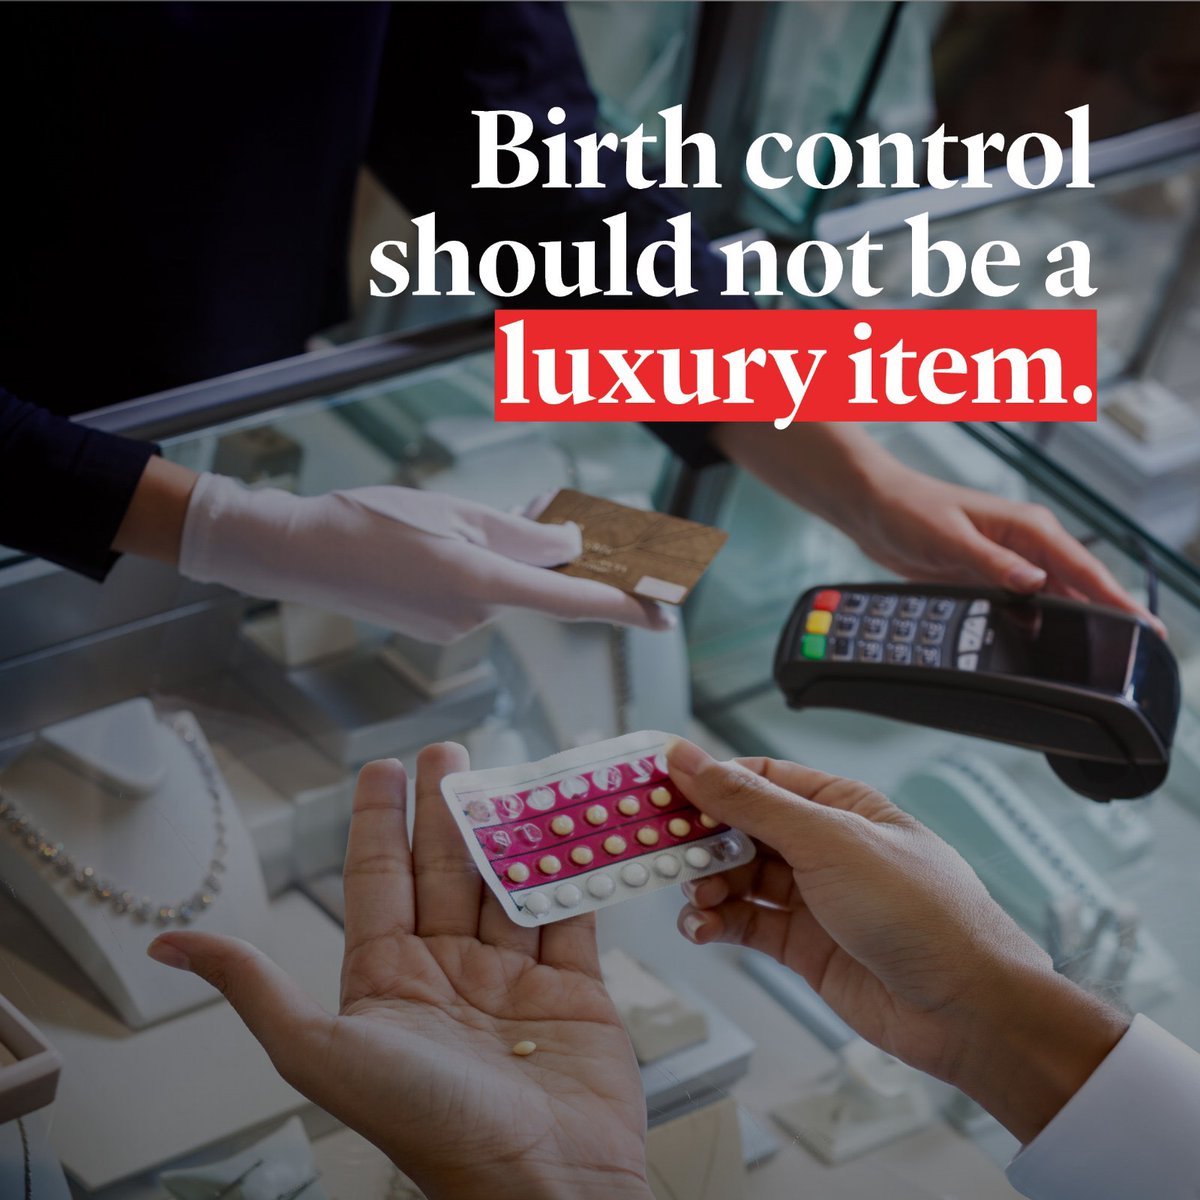 The UCP voted that birth control is a luxury item in November.

Then they doubled down in March and opted out of federal pharmacare..

#AbLeg #AbHealth #WomensHealthWeek